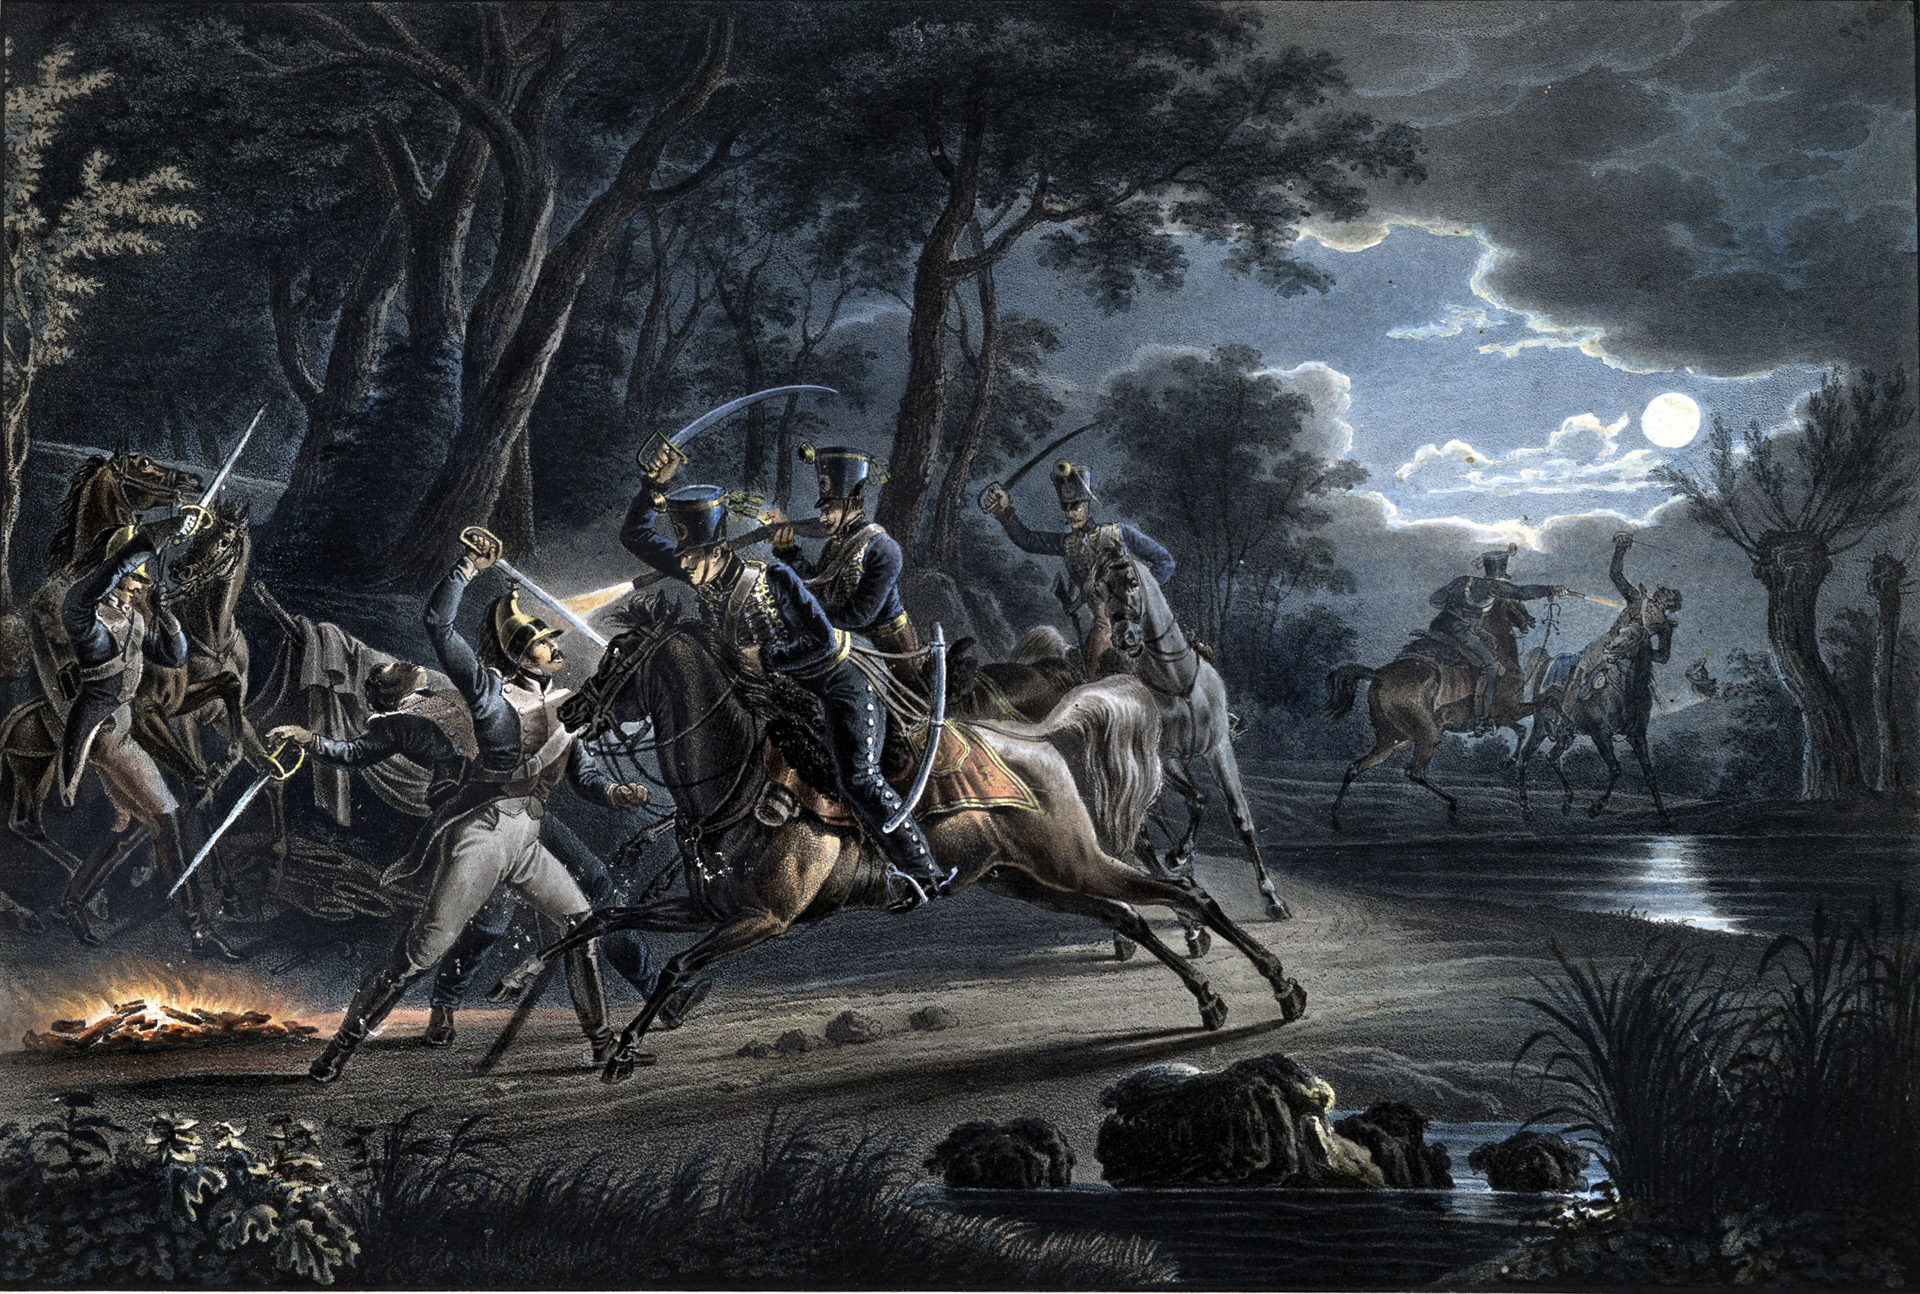 Austrian cavalry drove the French from the village of Telnitz on the eve of battle, but French foot soldiers retook the village later that night.